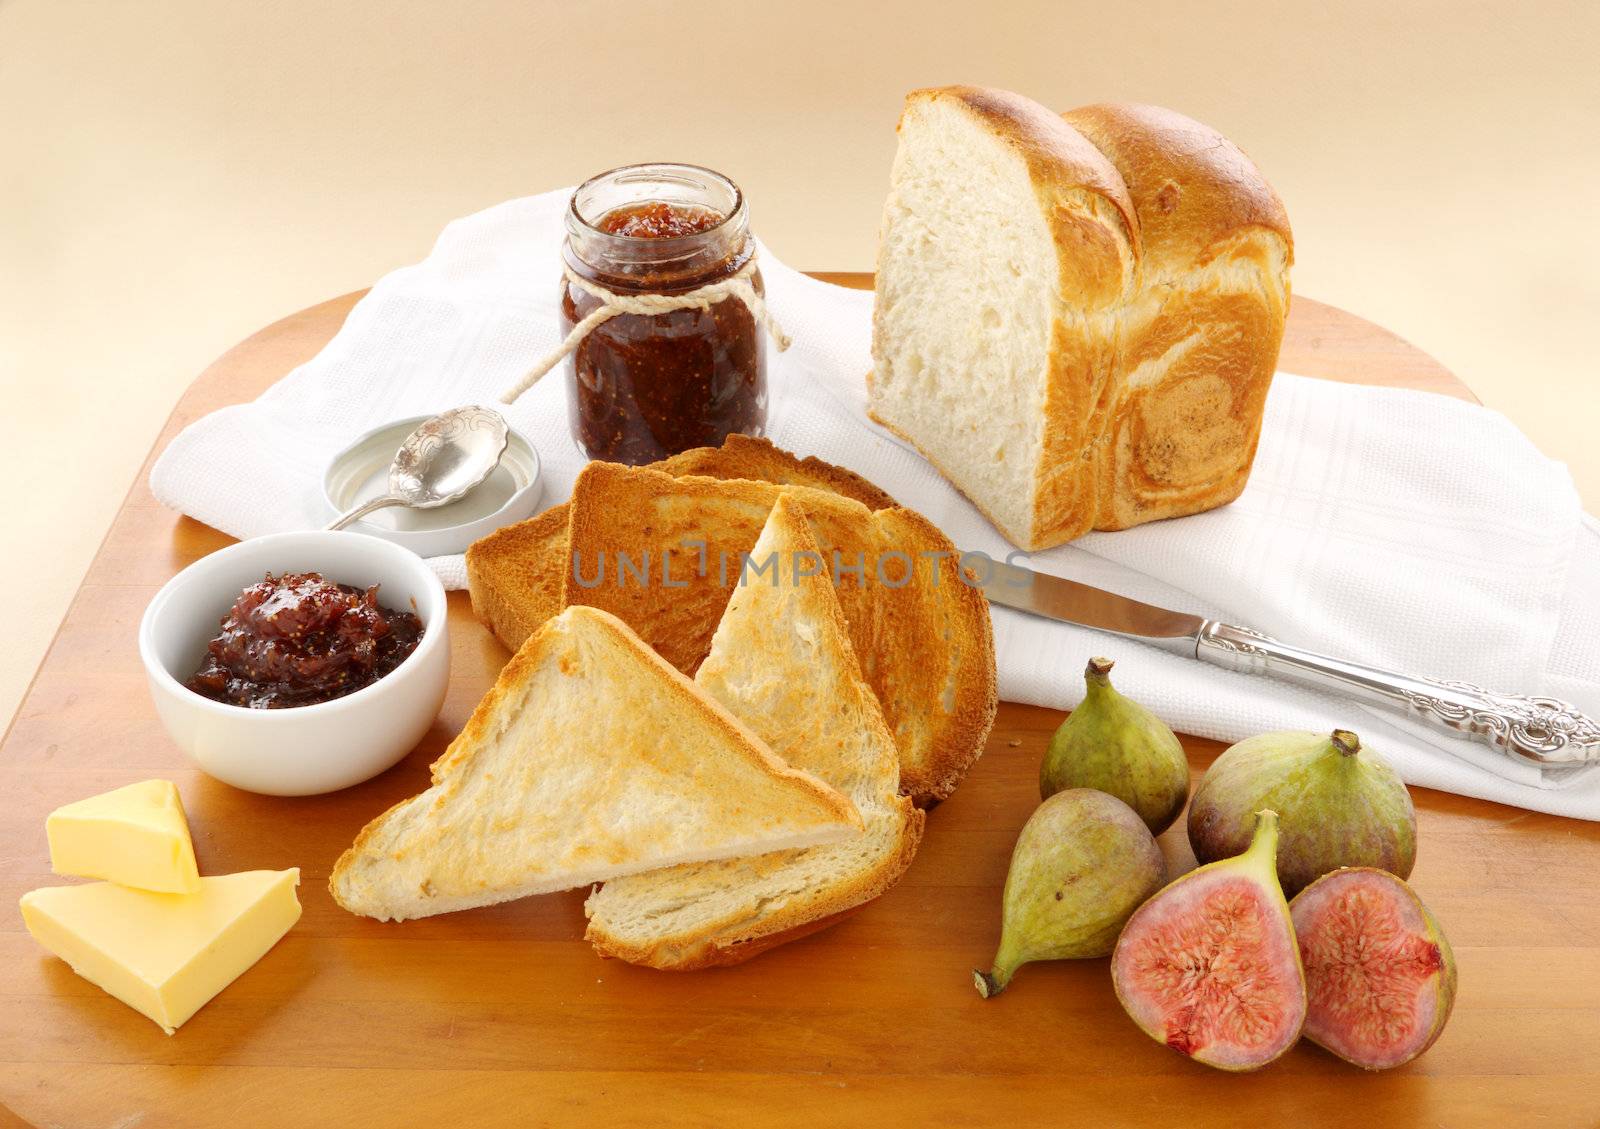 Homemade fig jam with crusty bread, toast and fresh figs.